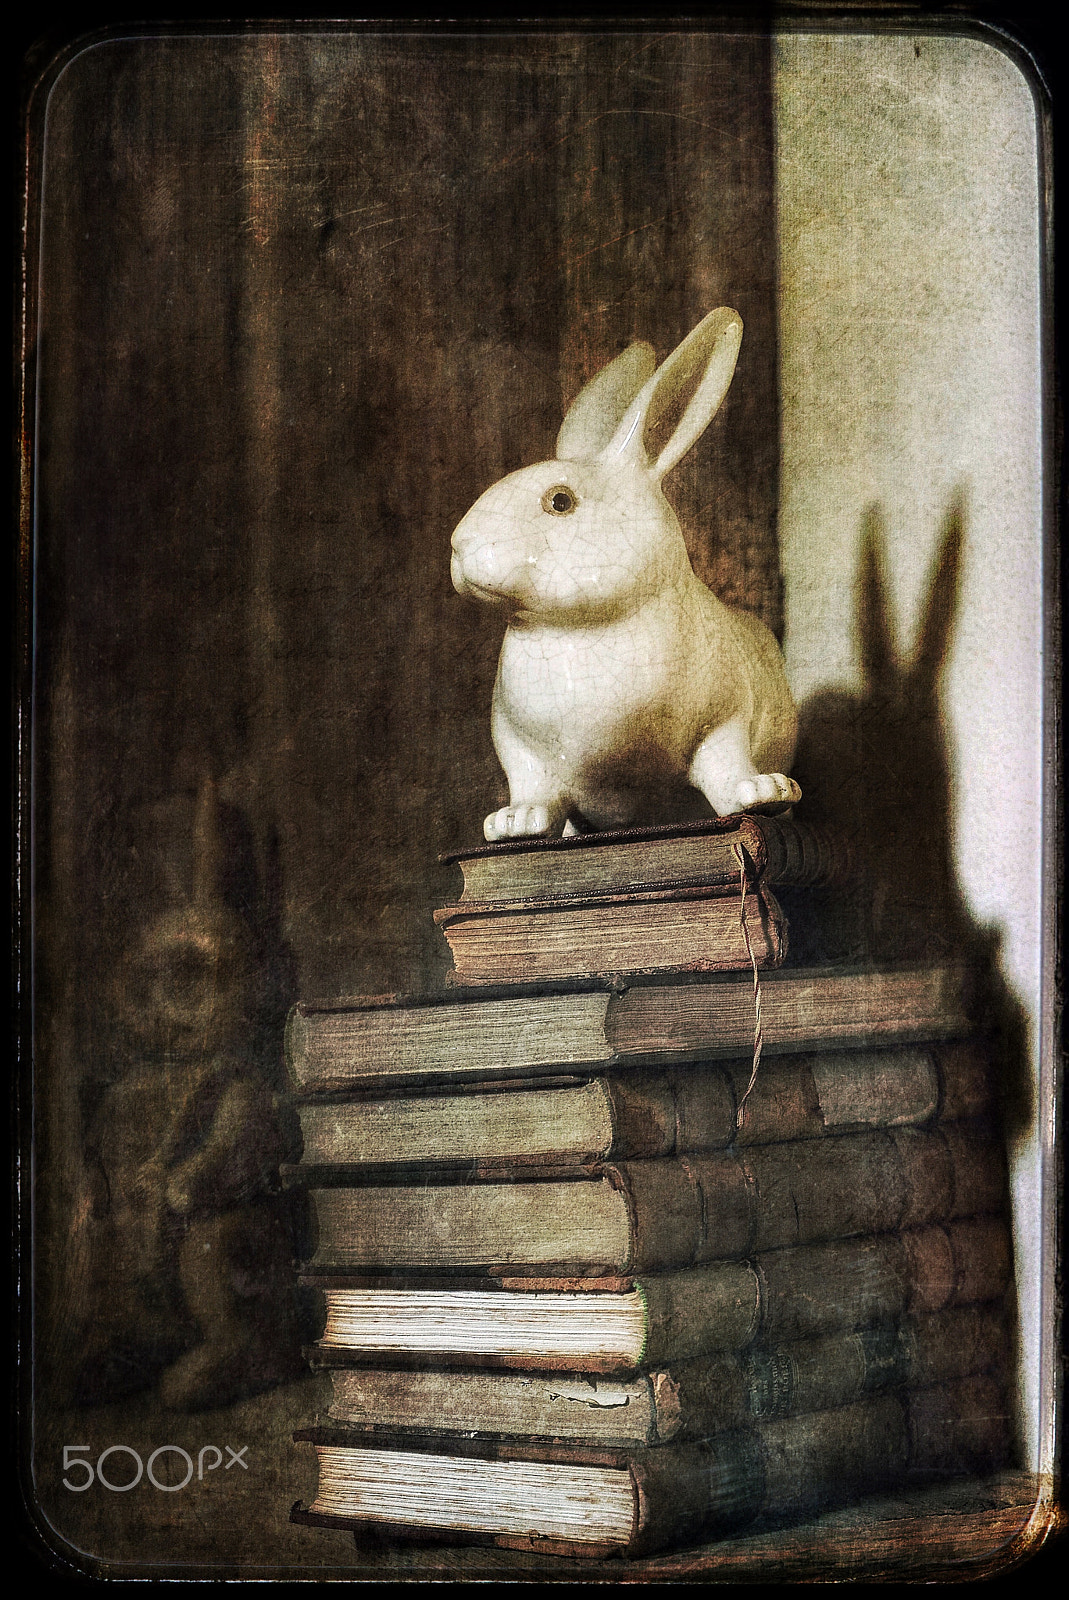 Sony a7S sample photo. Still life "bunny and the books" photography